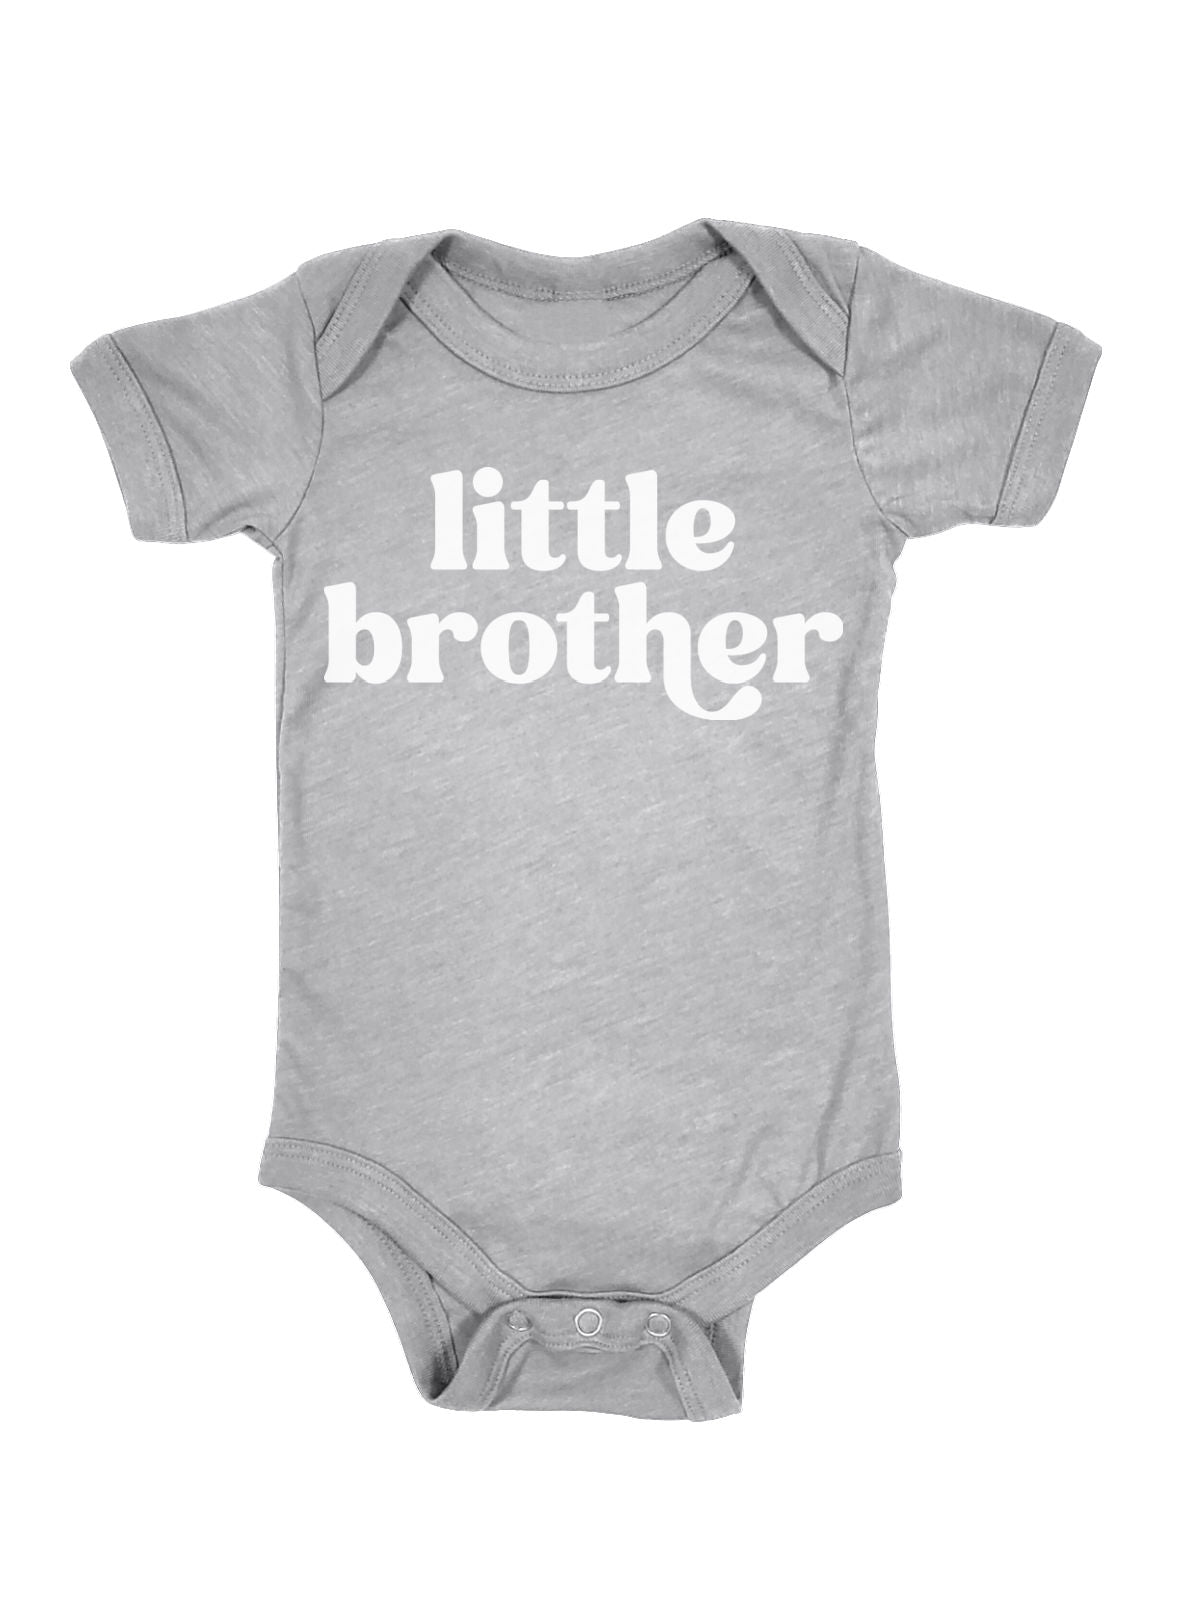 Little Brother Baby Bodysuit in Heather Gray